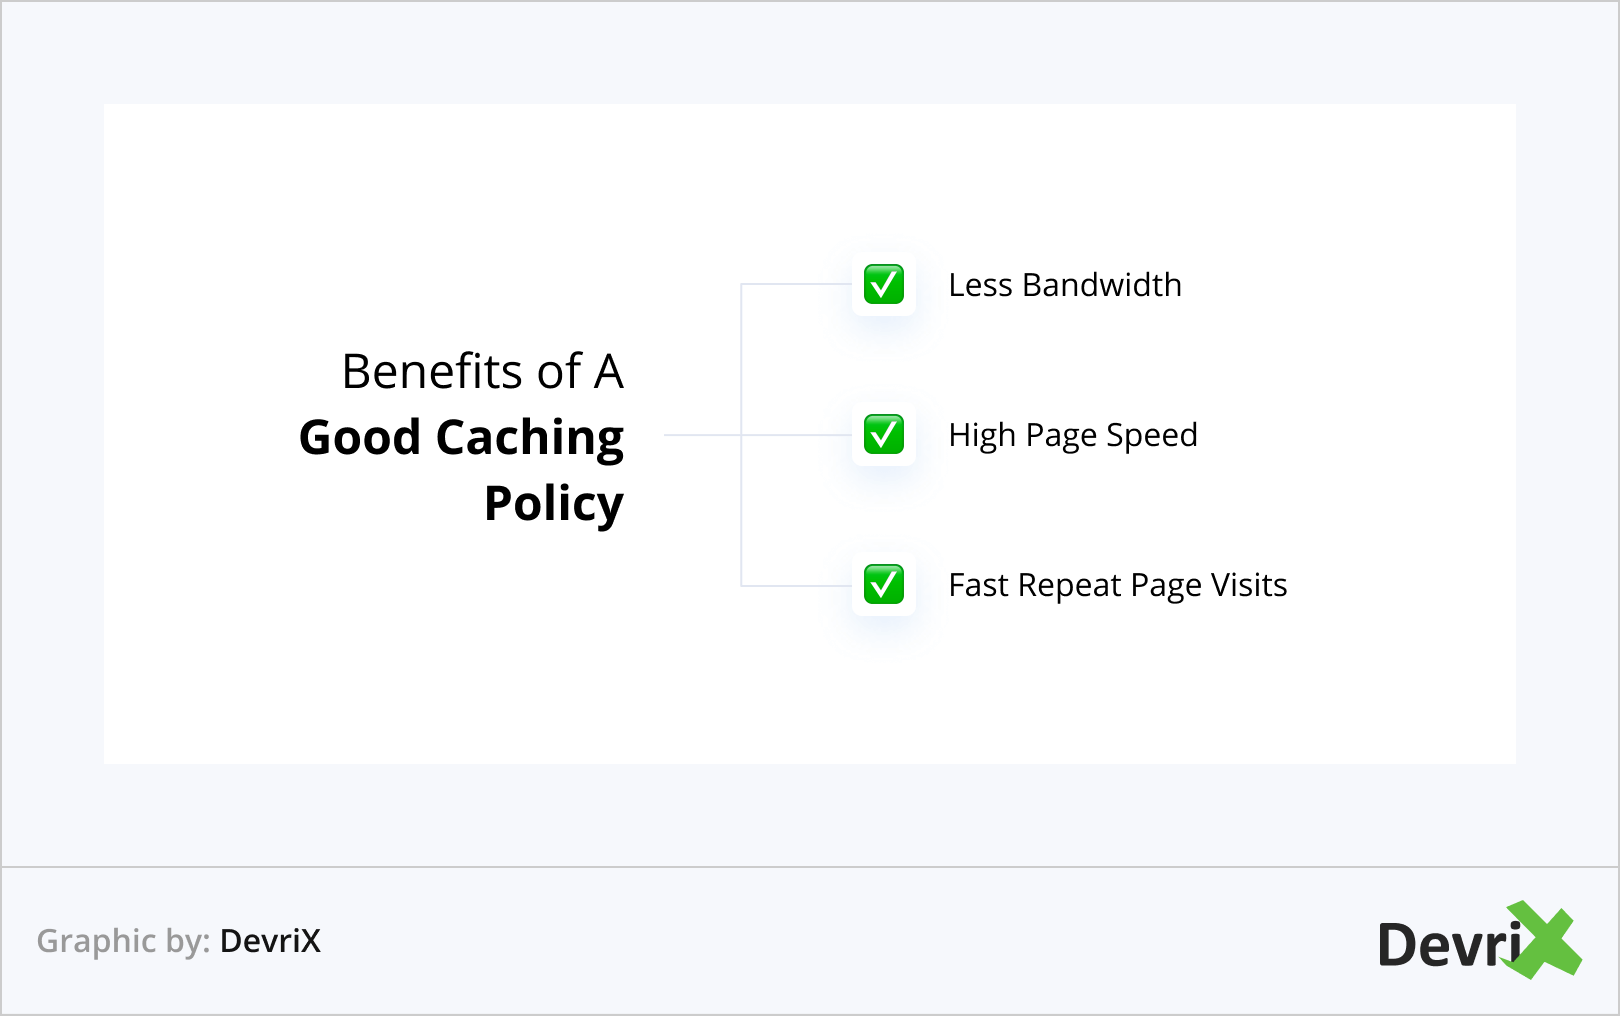 Benefits of A Good Caching Policy